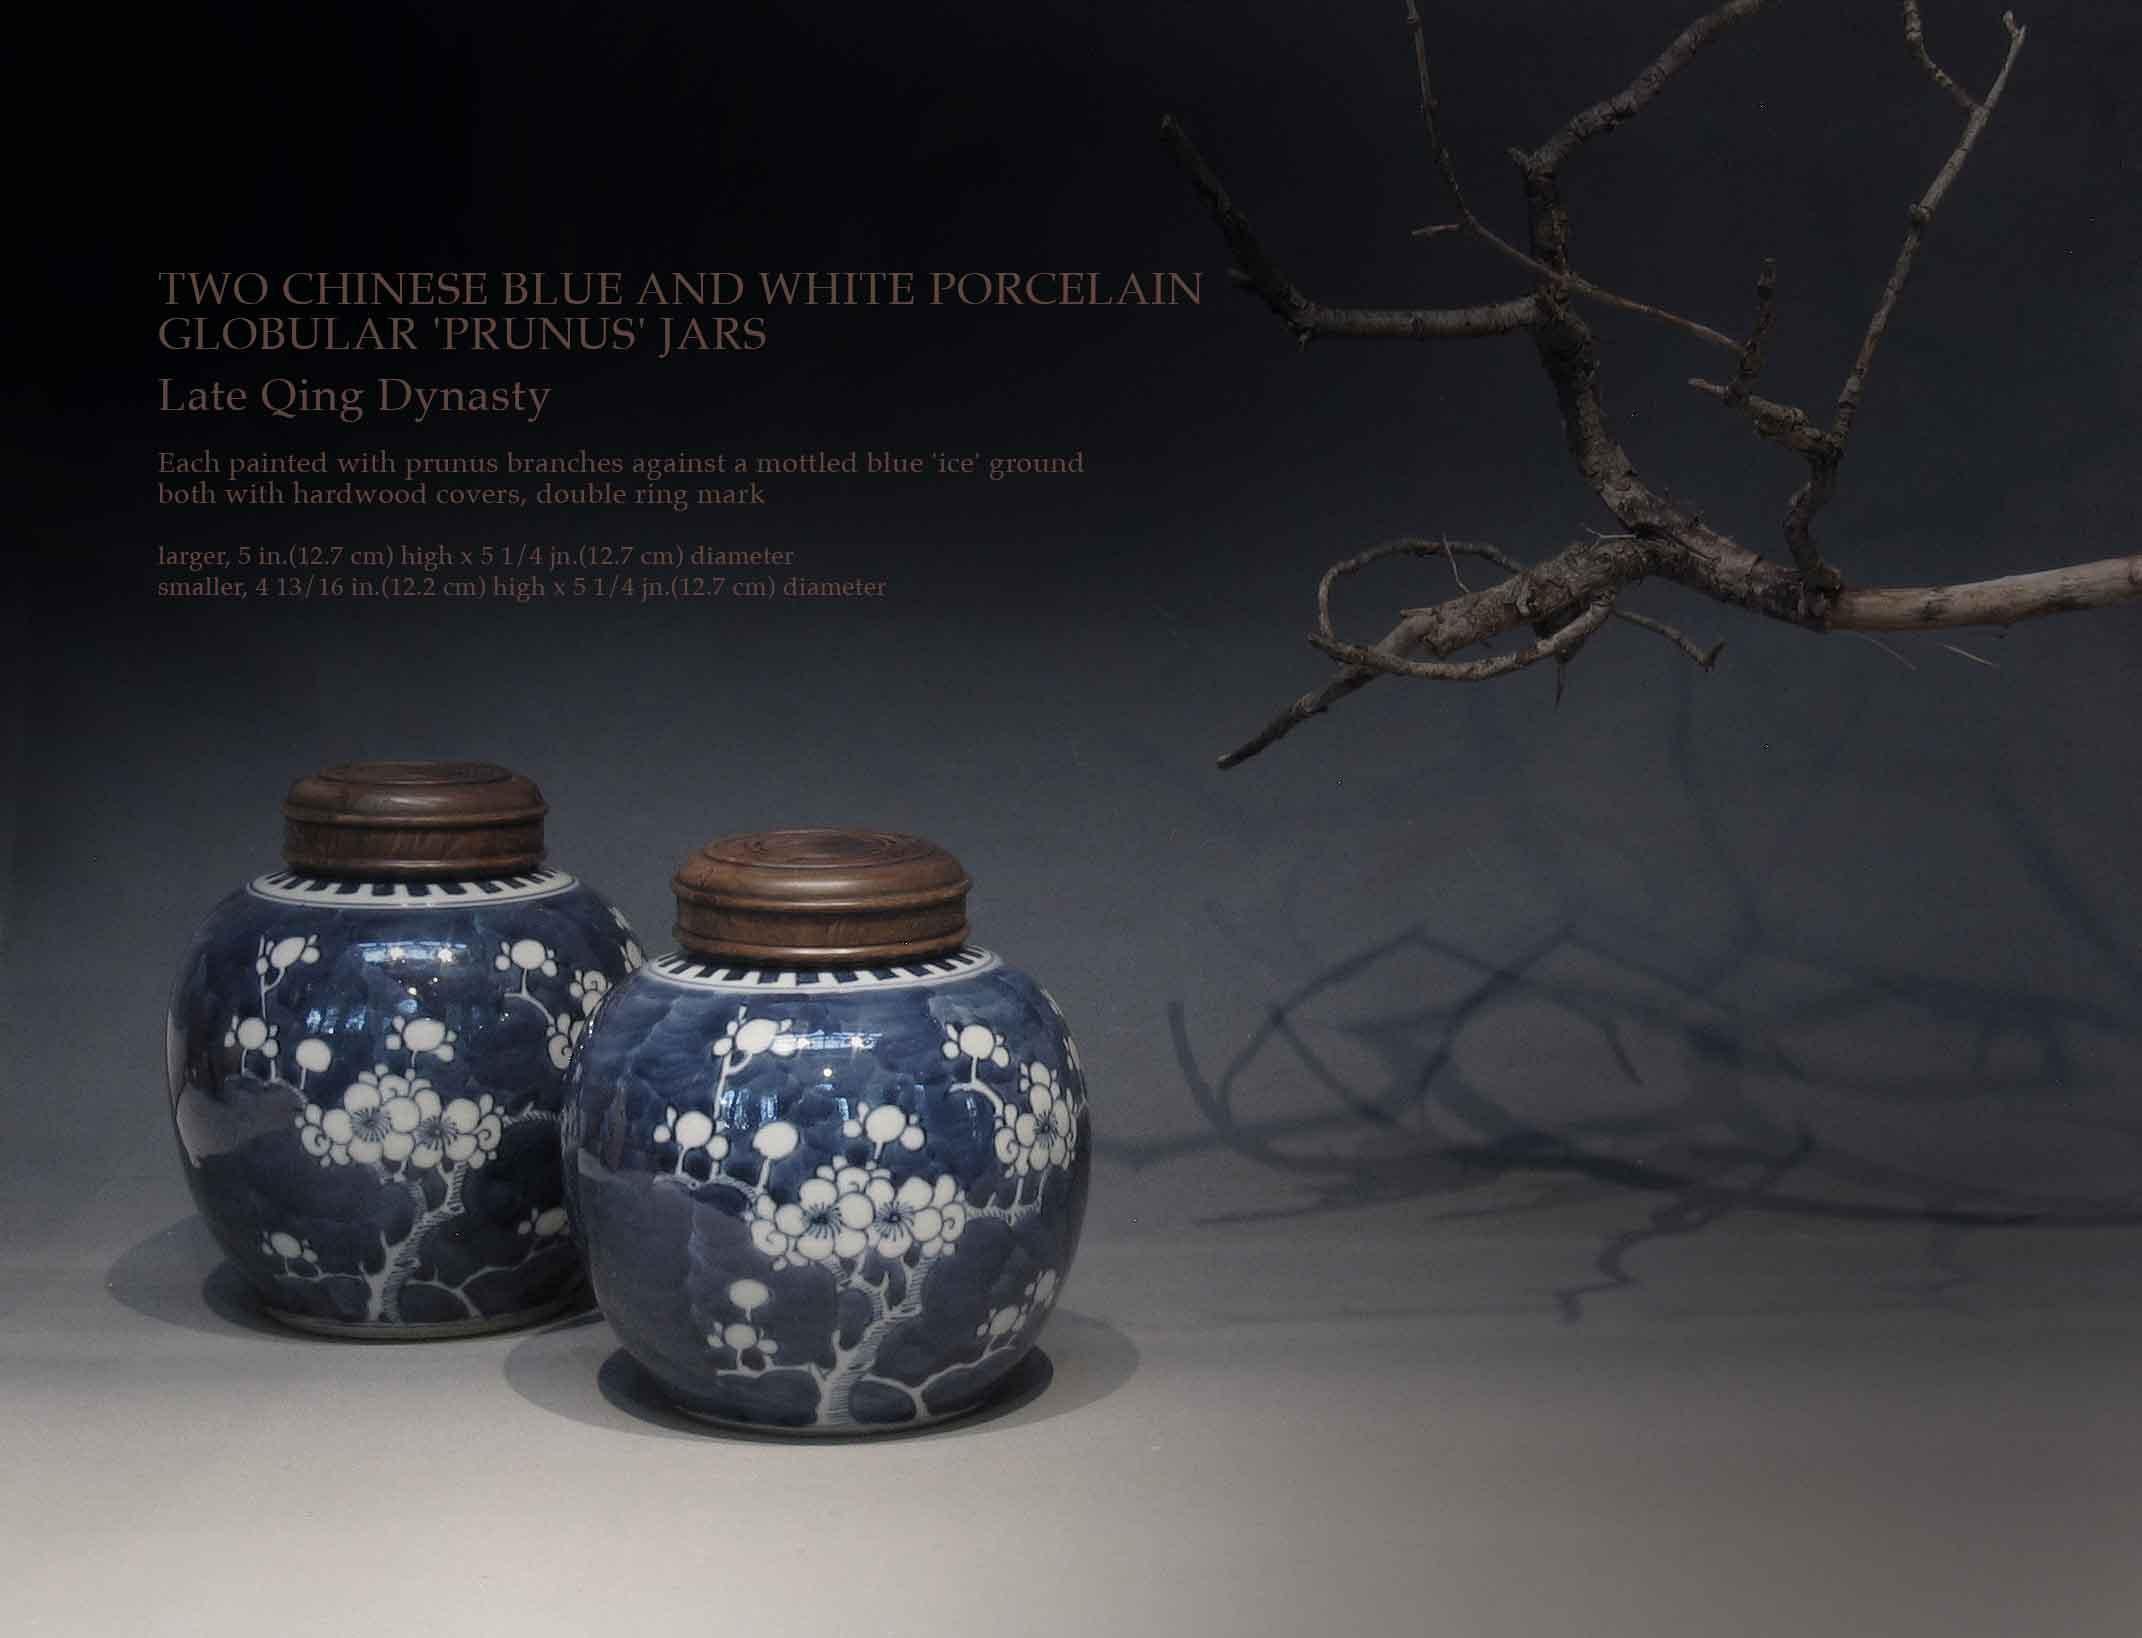 TWO CHINESE BLUE AND WHITE PORCELAIN
GLOBULAR 'PRUNUS' JARS

Late Qing Dynasty

Each painted with prunus branches against a mottled blue 'ice' ground
both with hardwood covers, double ring mark.

Larger : 5